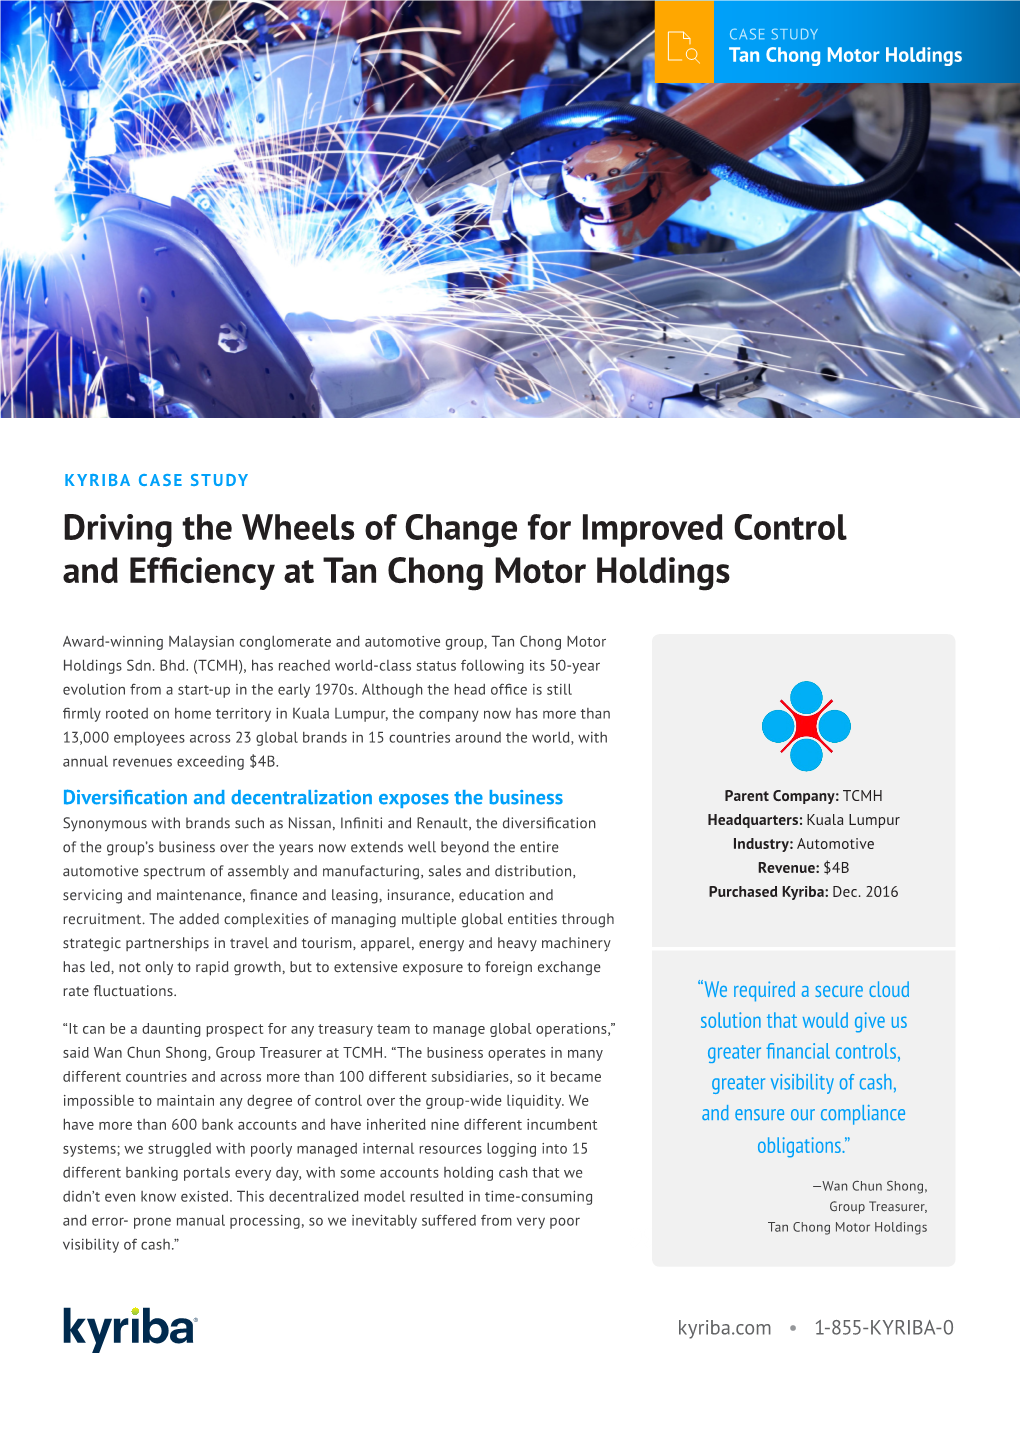 Driving the Wheels of Change for Improved Control and Efficiency at Tan Chong Motor Holdings